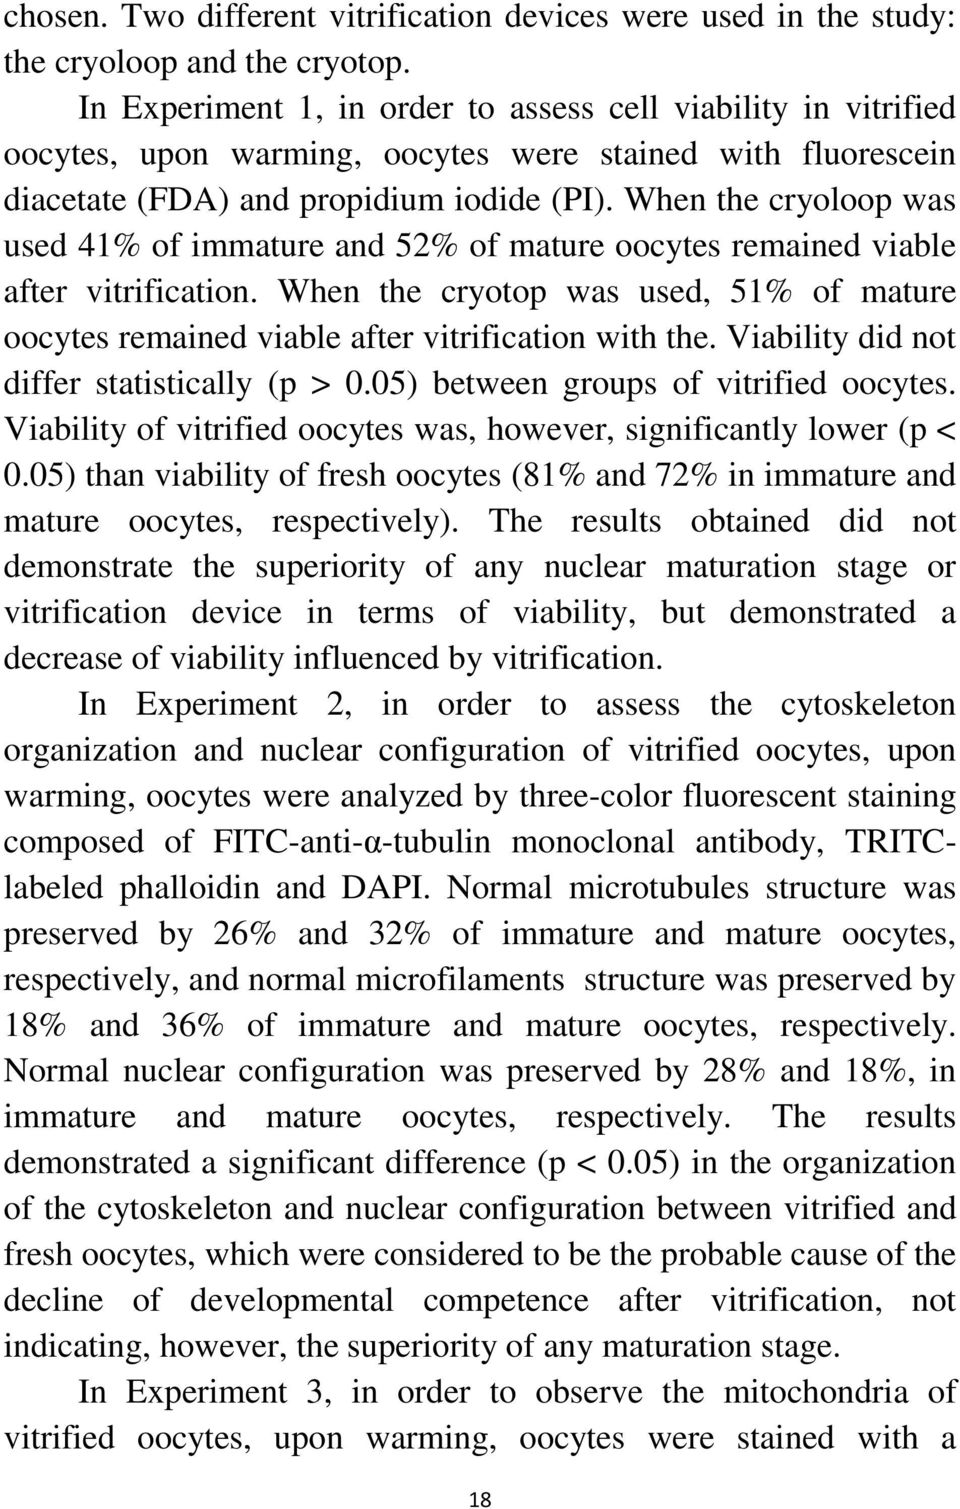 When the cryoloop was used 41% of immature and 52% of mature oocytes remained viable after vitrification. When the cryotop was used, 51% of mature oocytes remained viable after vitrification with the.